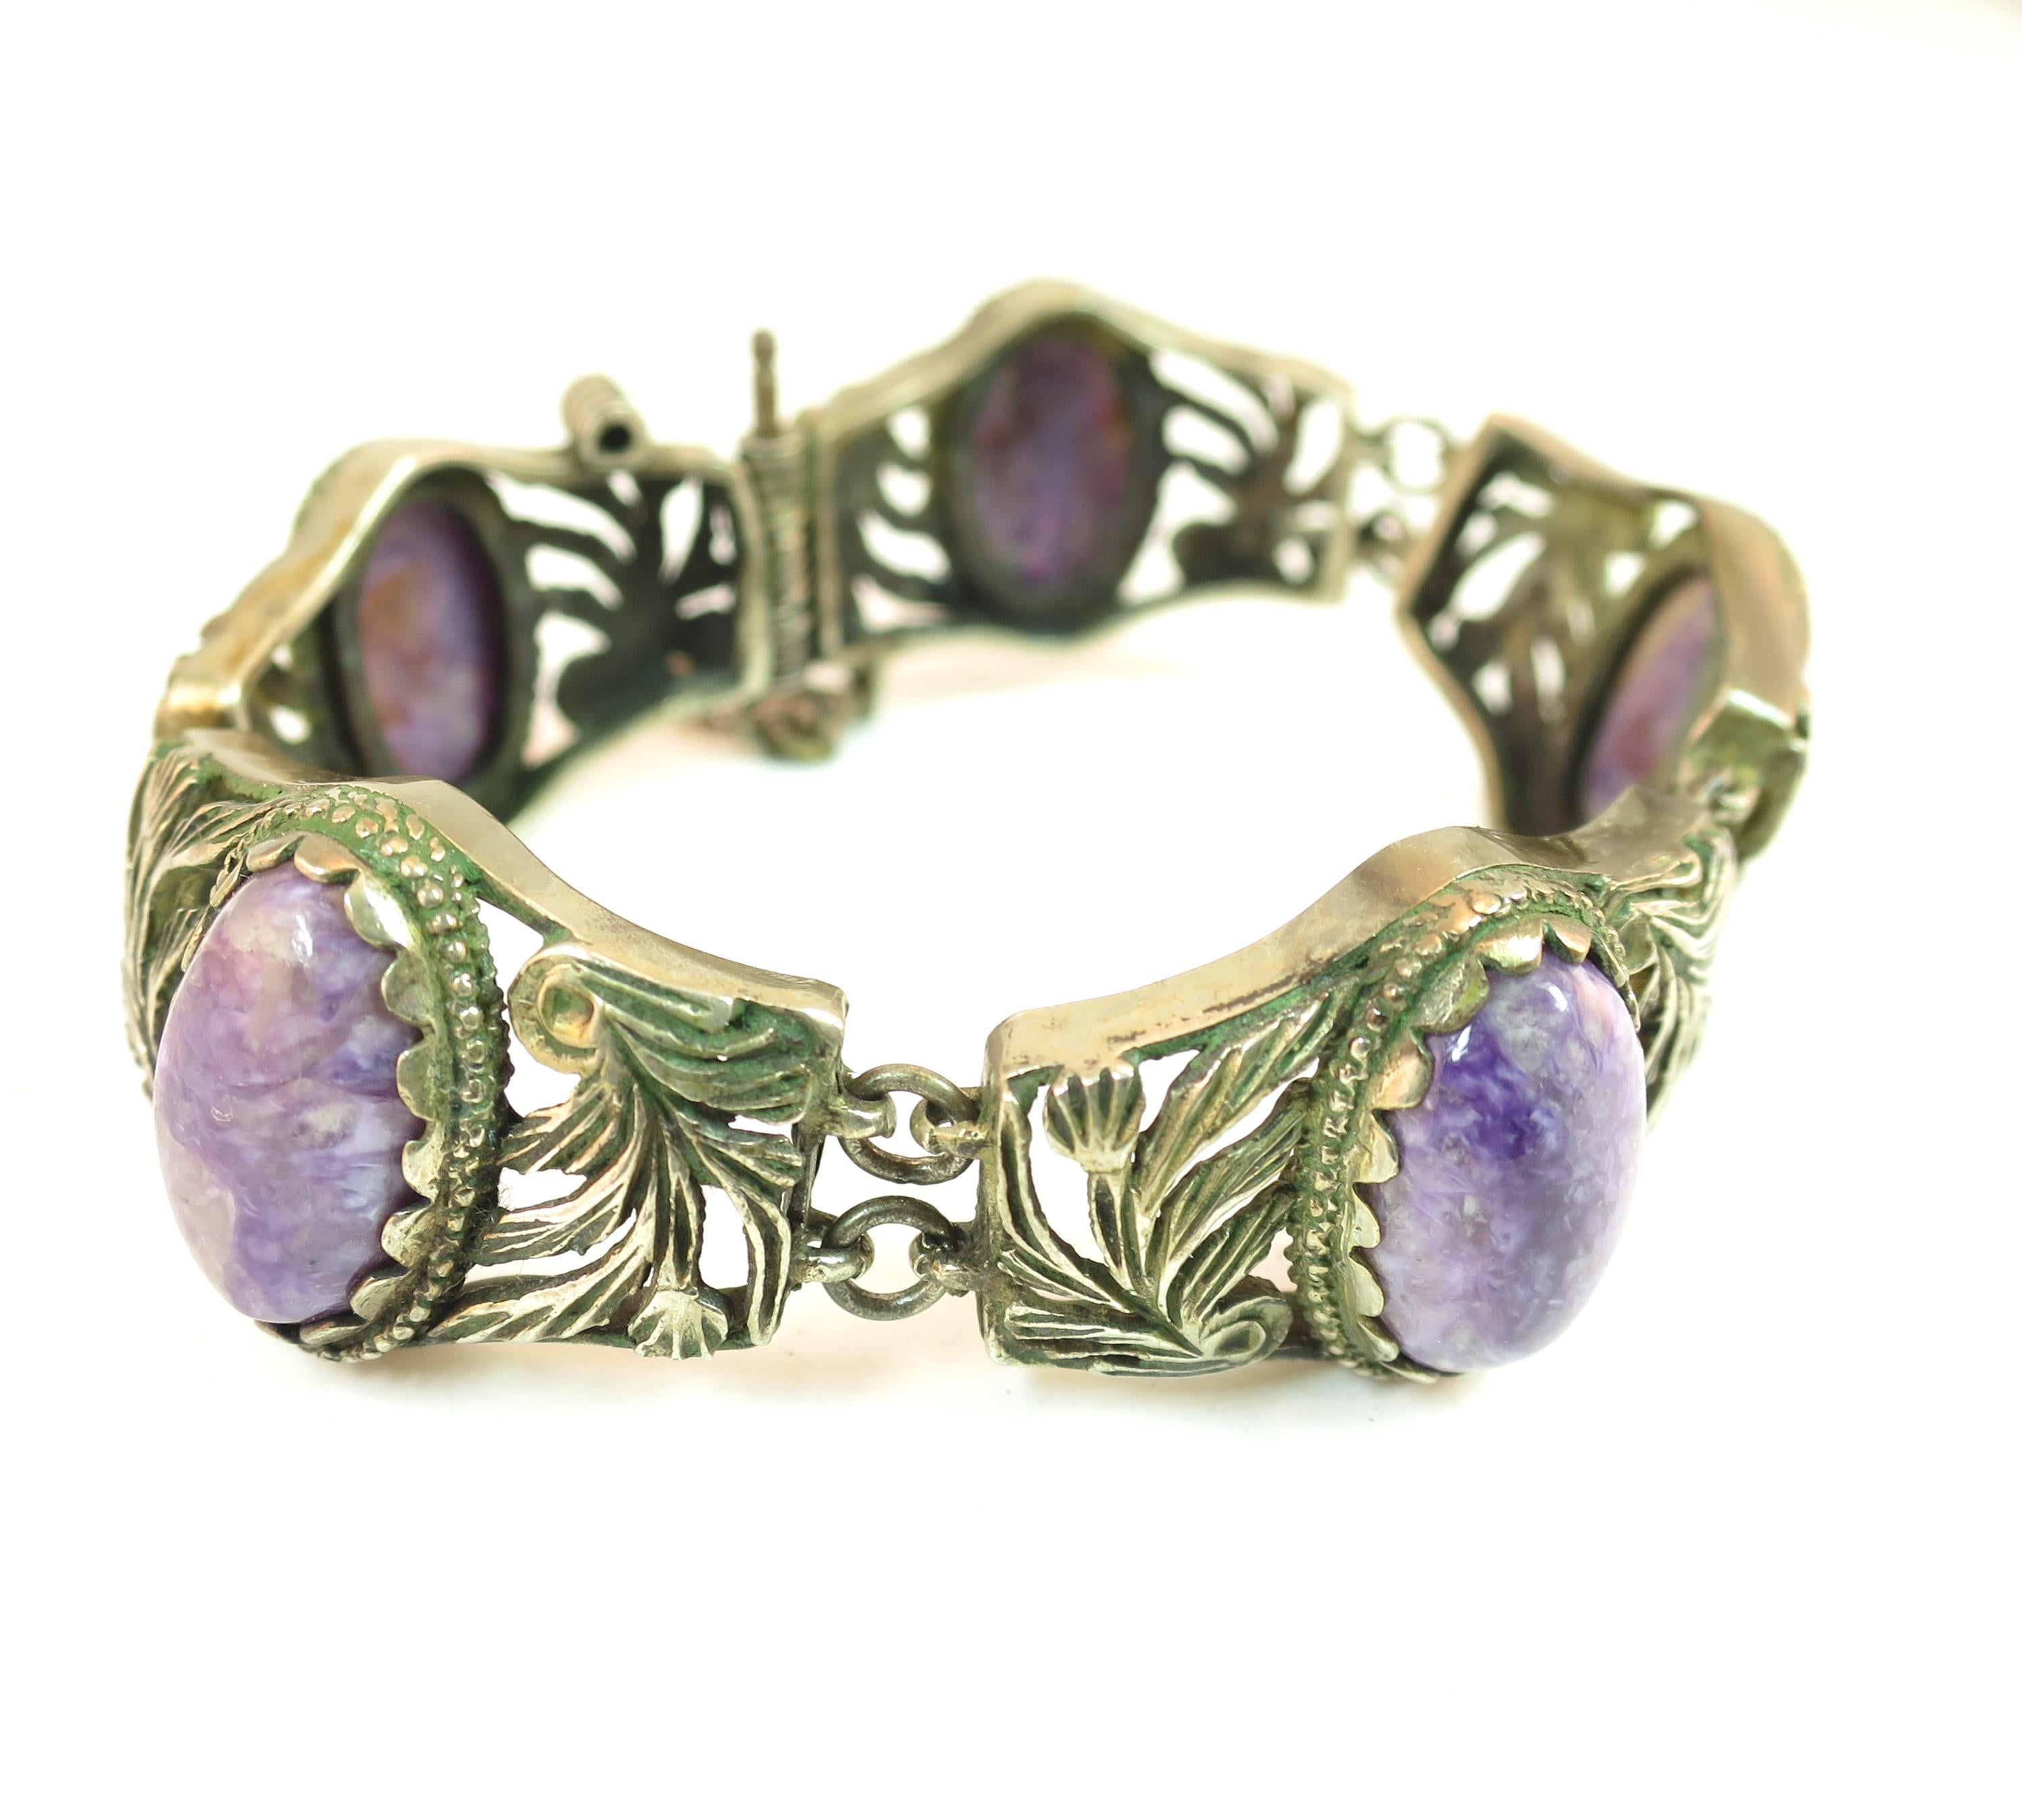 Victorian Chinese Export Silver & Amethyst Link Bracelet, Circa 1860s For Sale 5